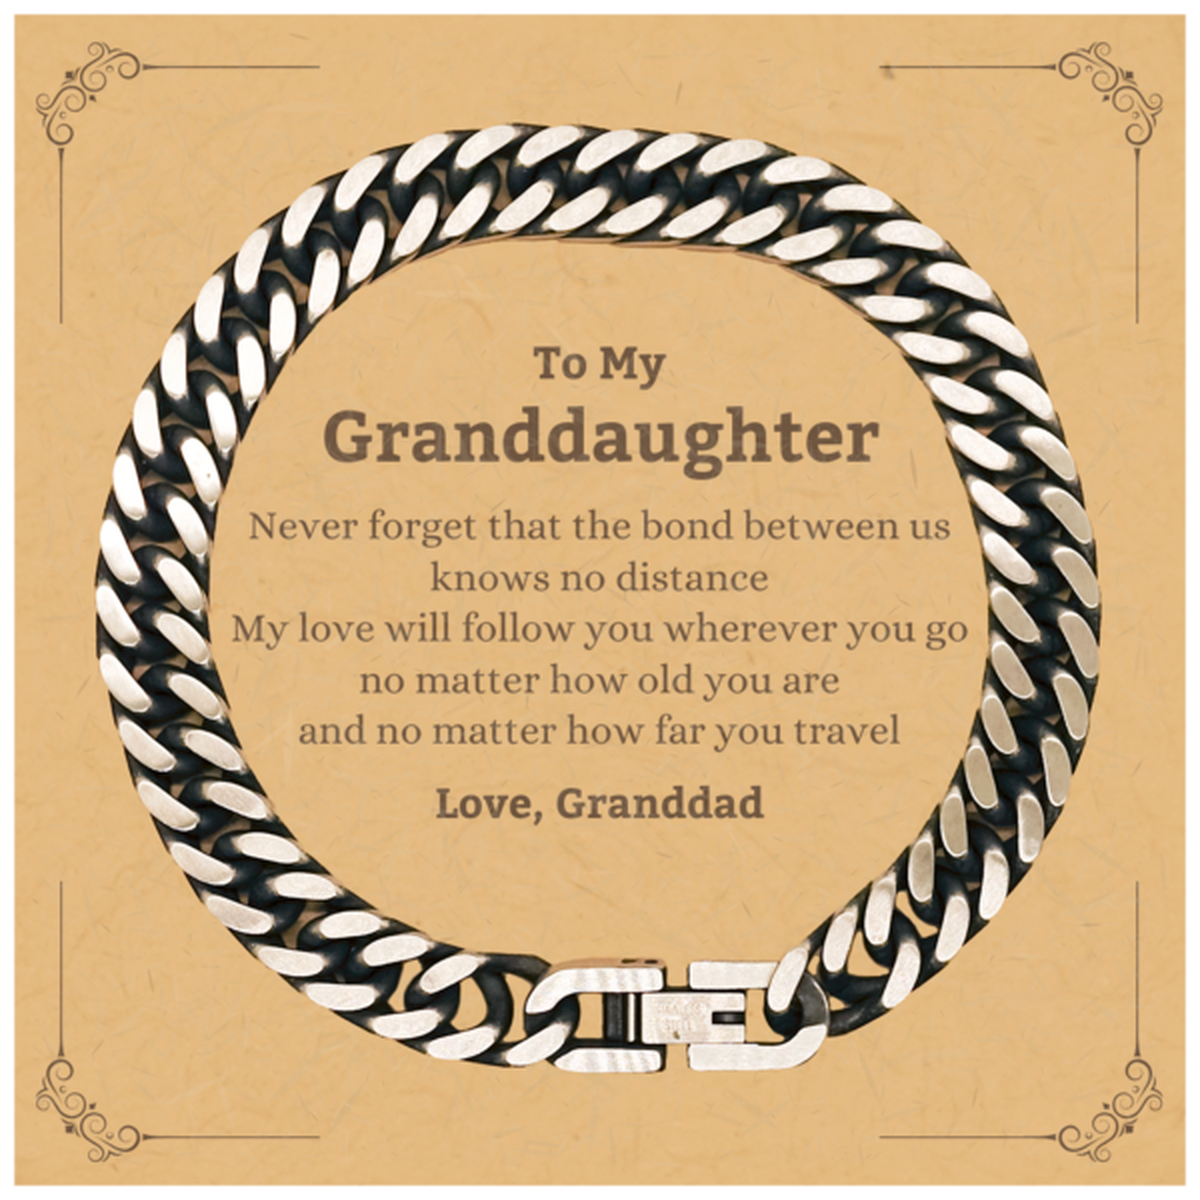 Granddaughter Birthday Gifts from Granddad, Adjustable Cuban Link Chain Bracelet for Granddaughter Christmas Graduation Unique Gifts Granddaughter Never forget that the bond between us knows no distance. Love, Granddad